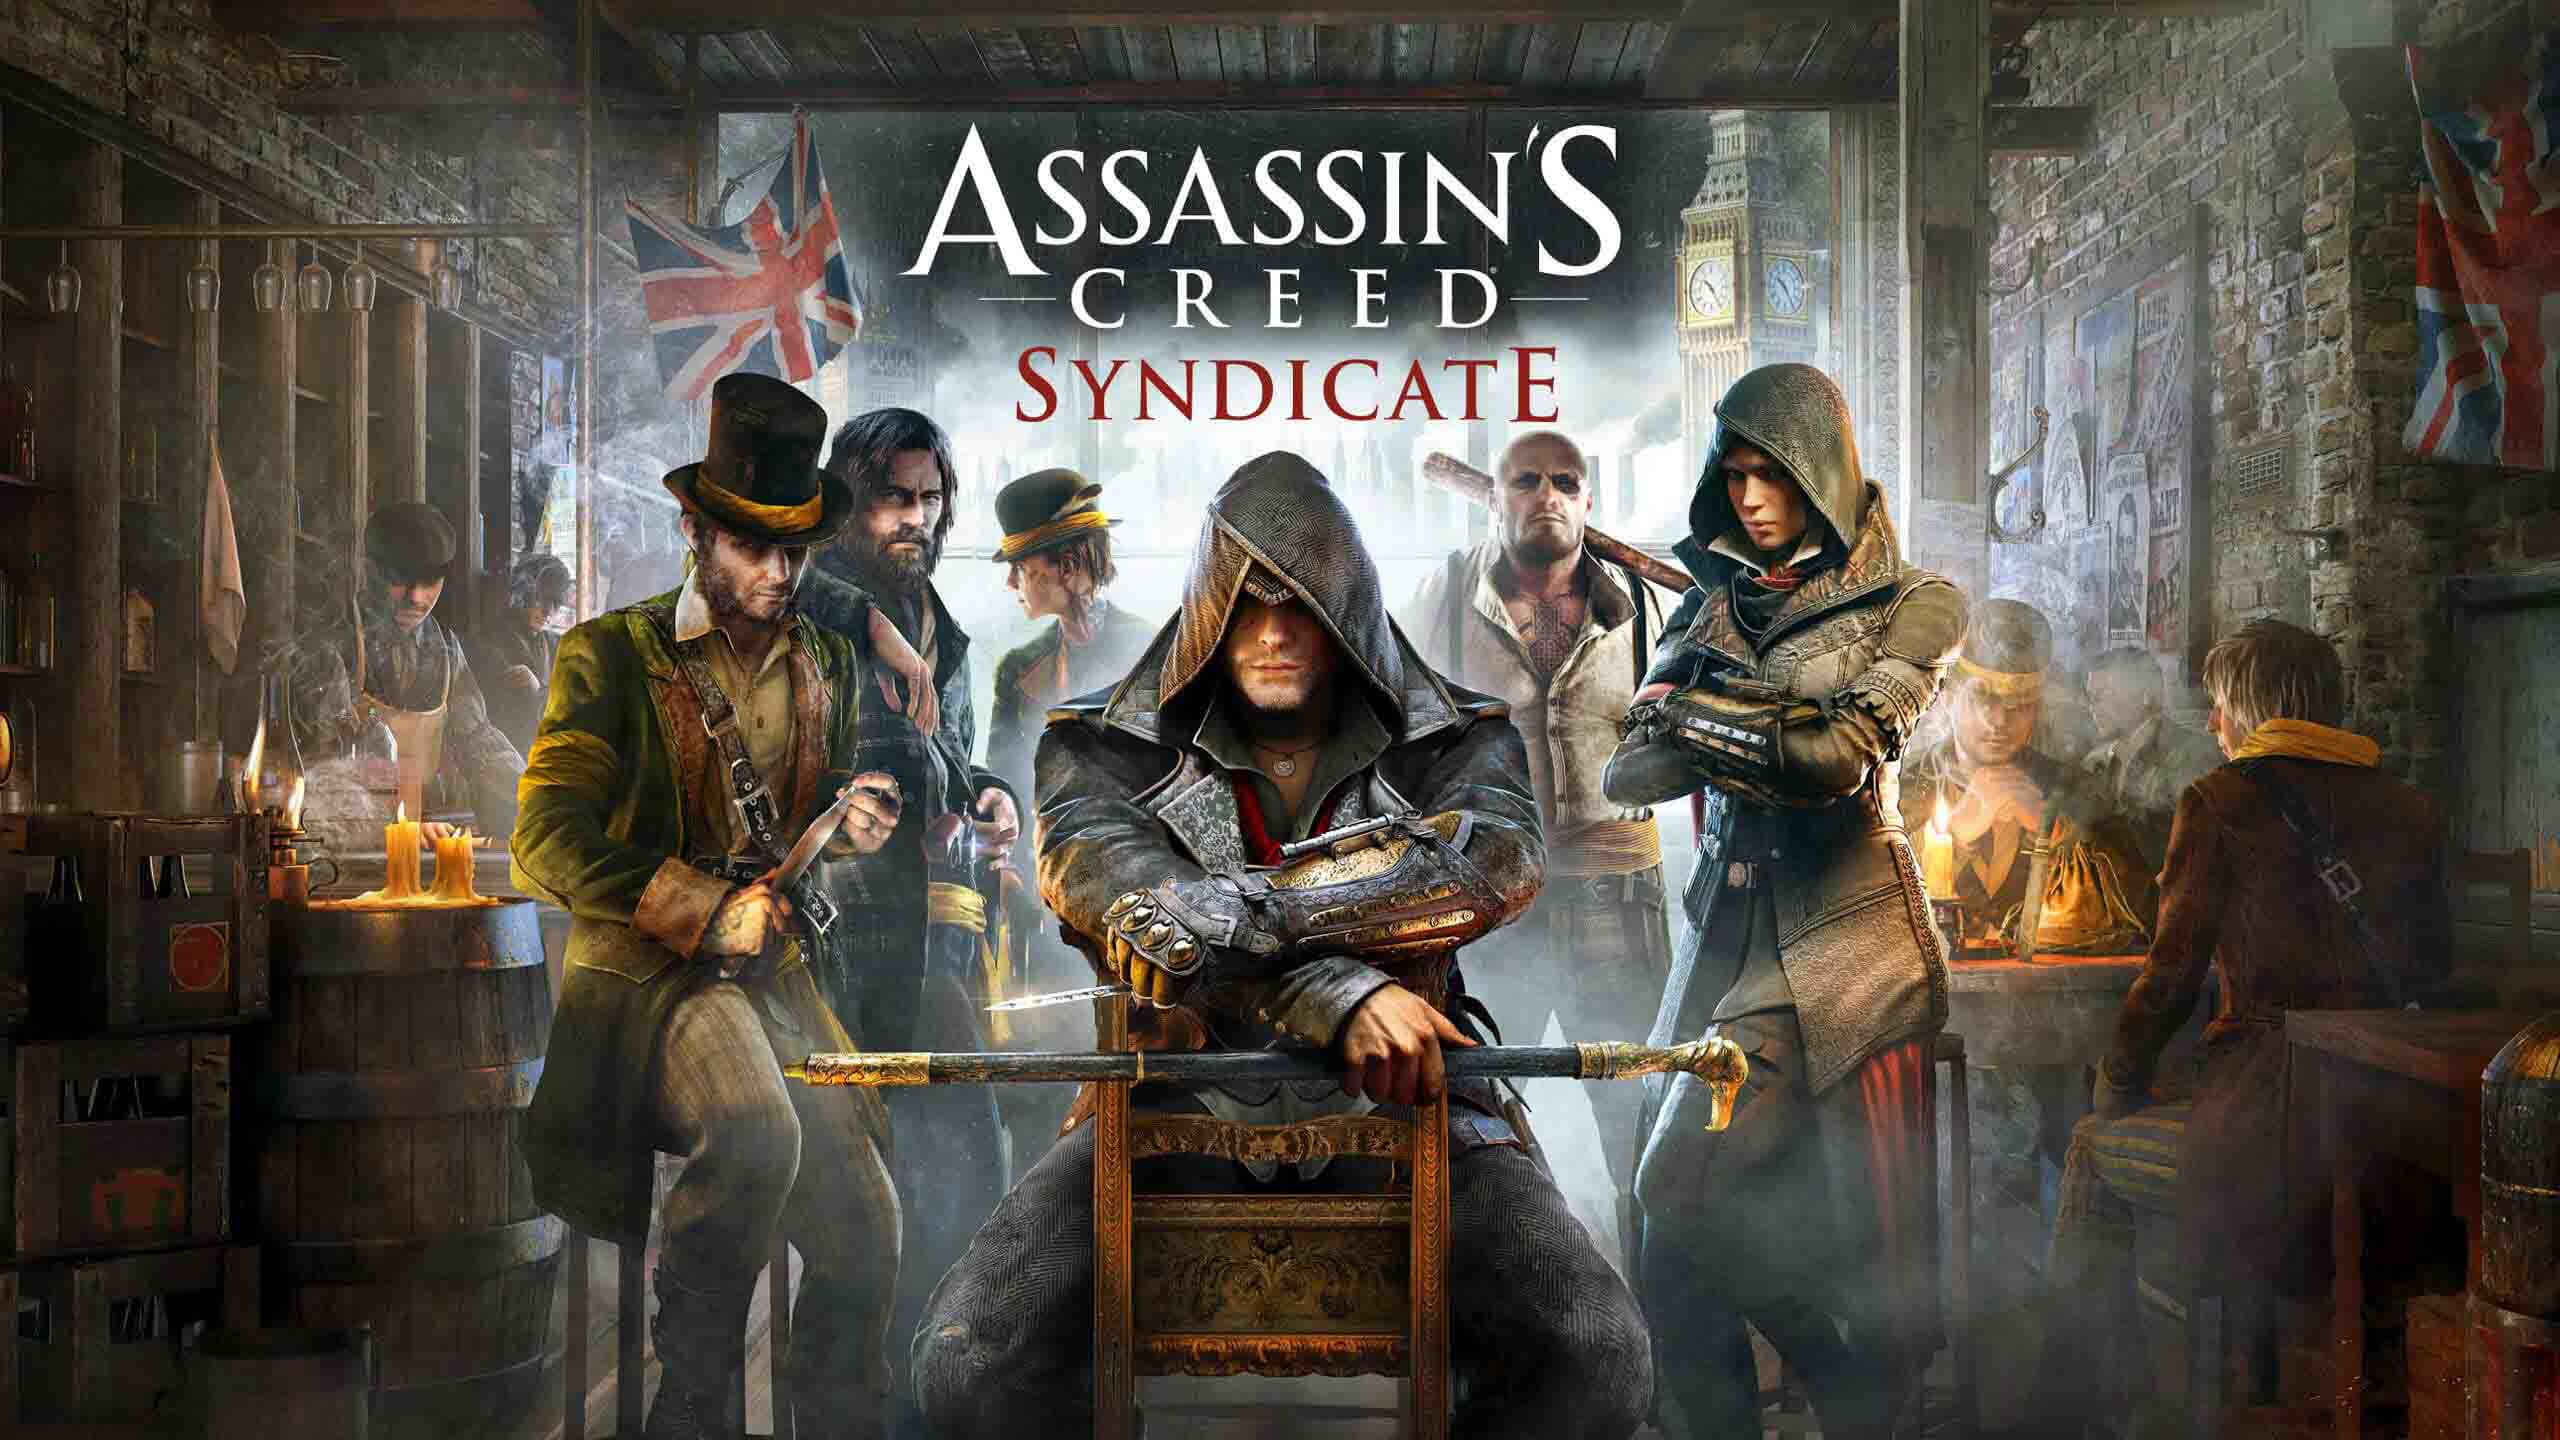 Assassin's Creed Syndicate System Requirements for PC Games minimum, recommended specifications for Windows, CPU, OS, Processor, RAM Memory, Storage, and GPU.